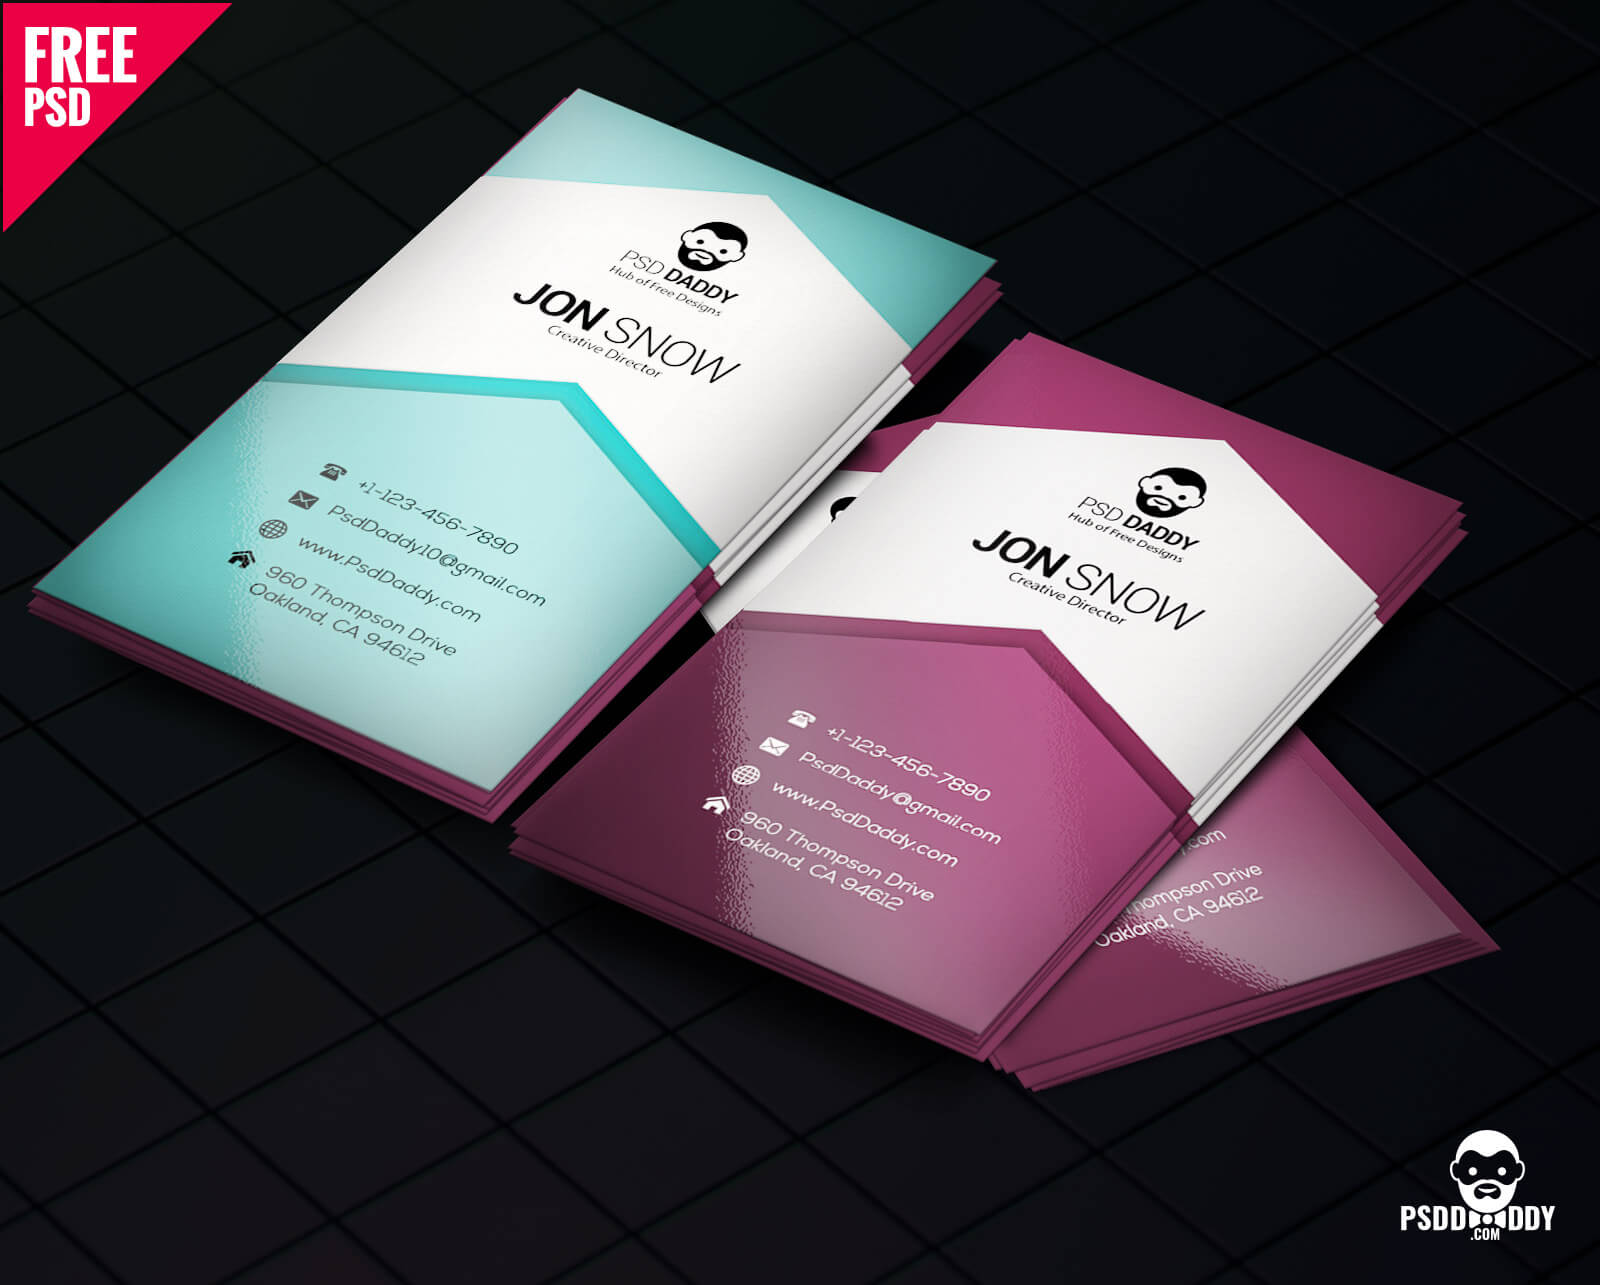 Download]Creative Business Card Psd Free | Psddaddy Pertaining To Creative Business Card Templates Psd